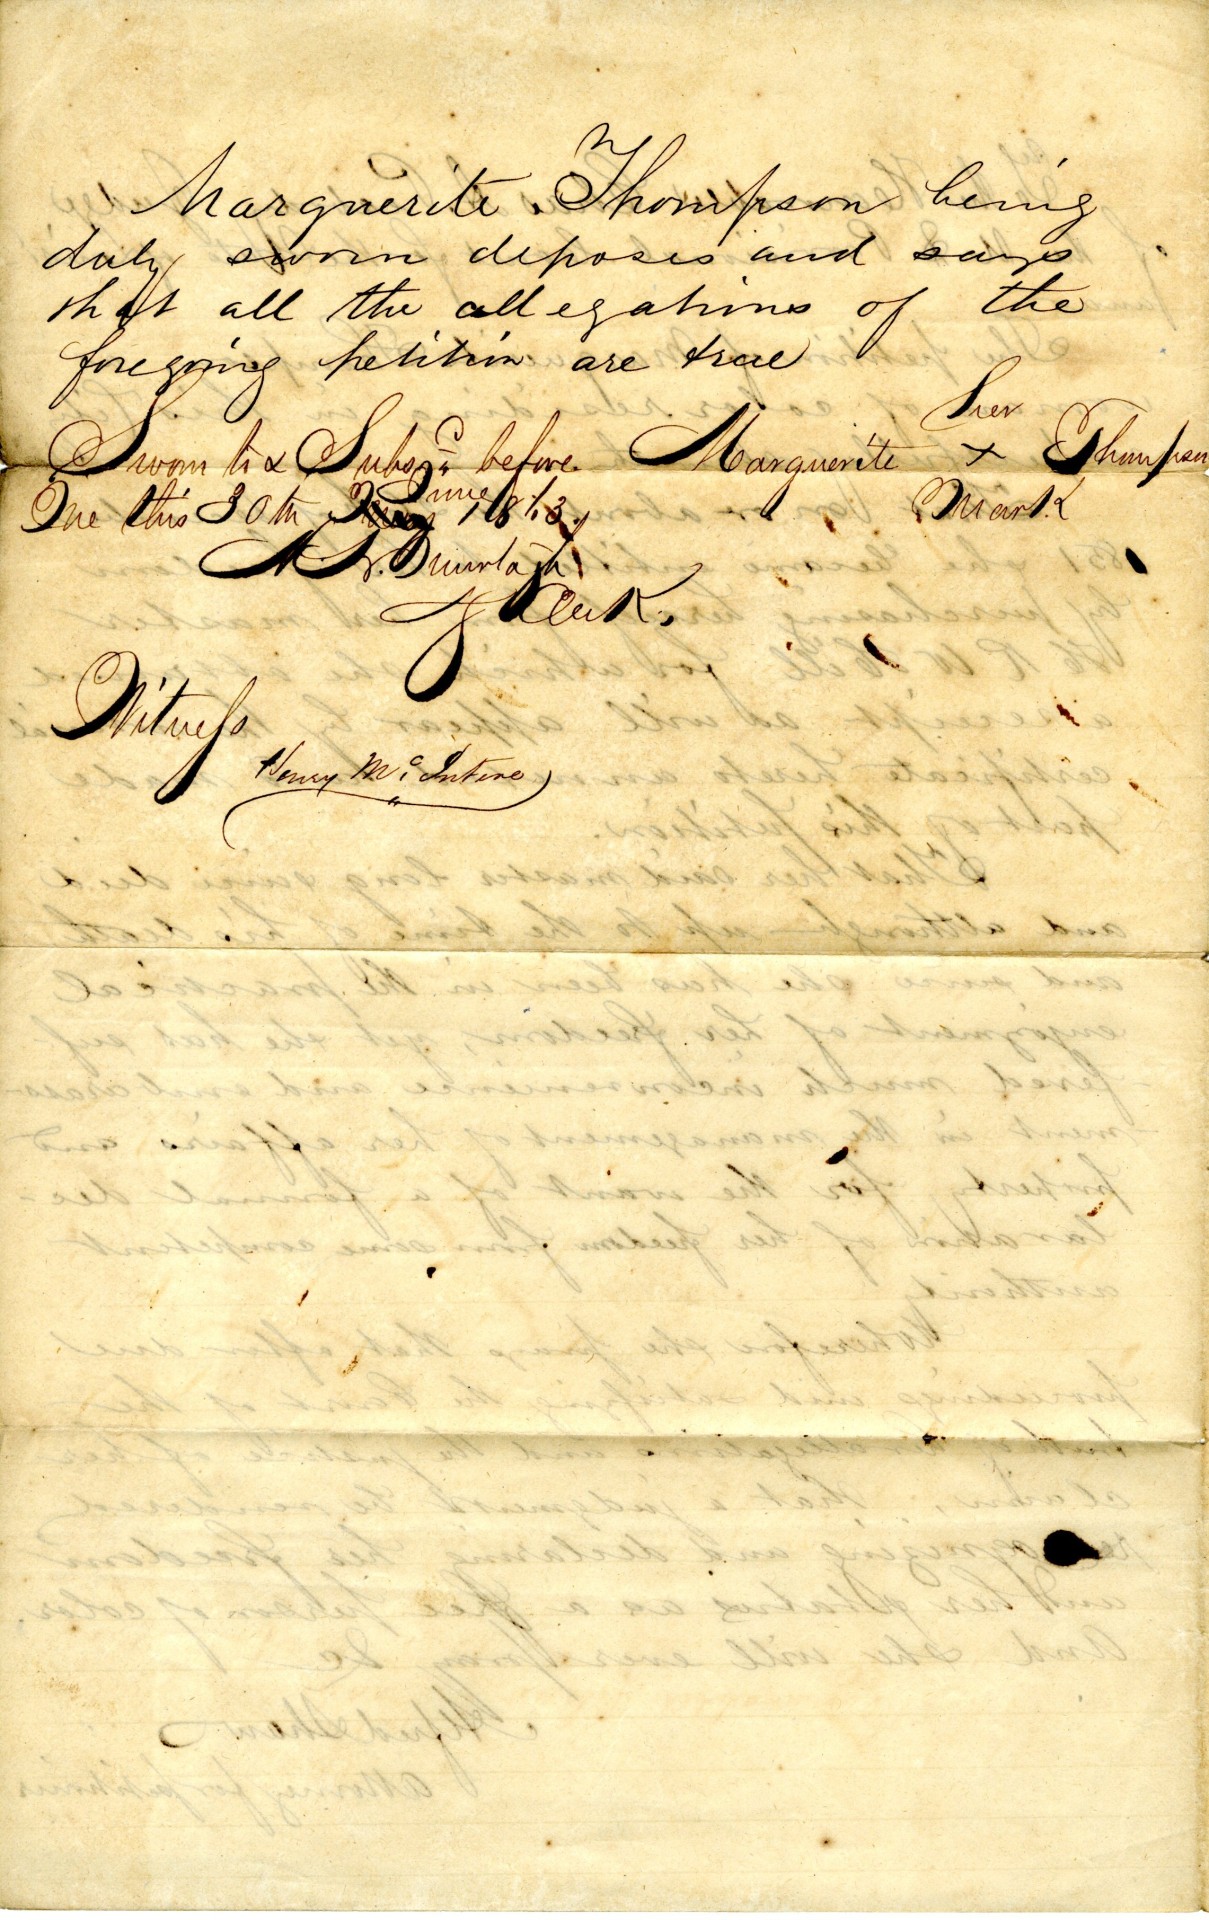 Petition Filed by Marguerite Thompson Praying for Her Emancipation, 6/30/1863From the series:  Case Files, 1863 - 1865. Records of District Courts of the United States, 1685 - 2009This petition was filed by Marguerite Thompson, a “woman of color,” to secure her emancipation in 1863.  In 1851 she purchased her freedom from her master and received a receipt for the transaction.  She enjoyed her freedom, but still didn’t have full control of her affairs and property because she did not have an official degree from an authority.  On the final page of the document, the court declares her “henceforth and forever free.“You can make this document more searchable and accessible by helping to transcribe it in the National Archives Catalog.